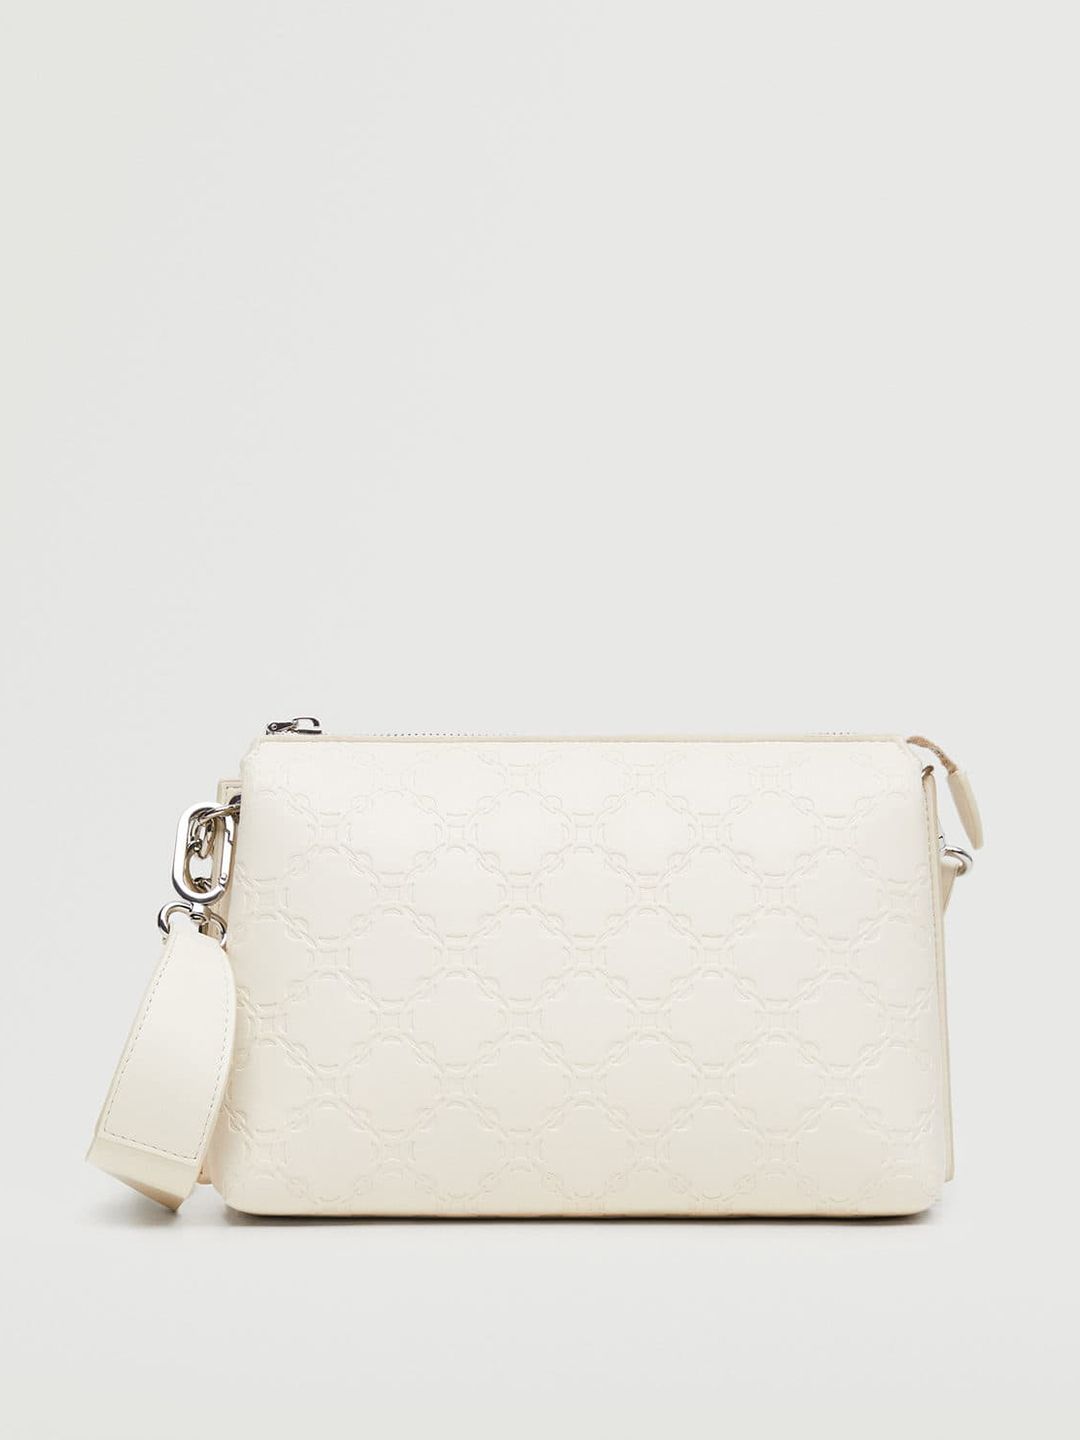 MANGO Off White Ethnic Motifs Textured Structured Shoulder Bag with Detachable Sling Strap Price in India